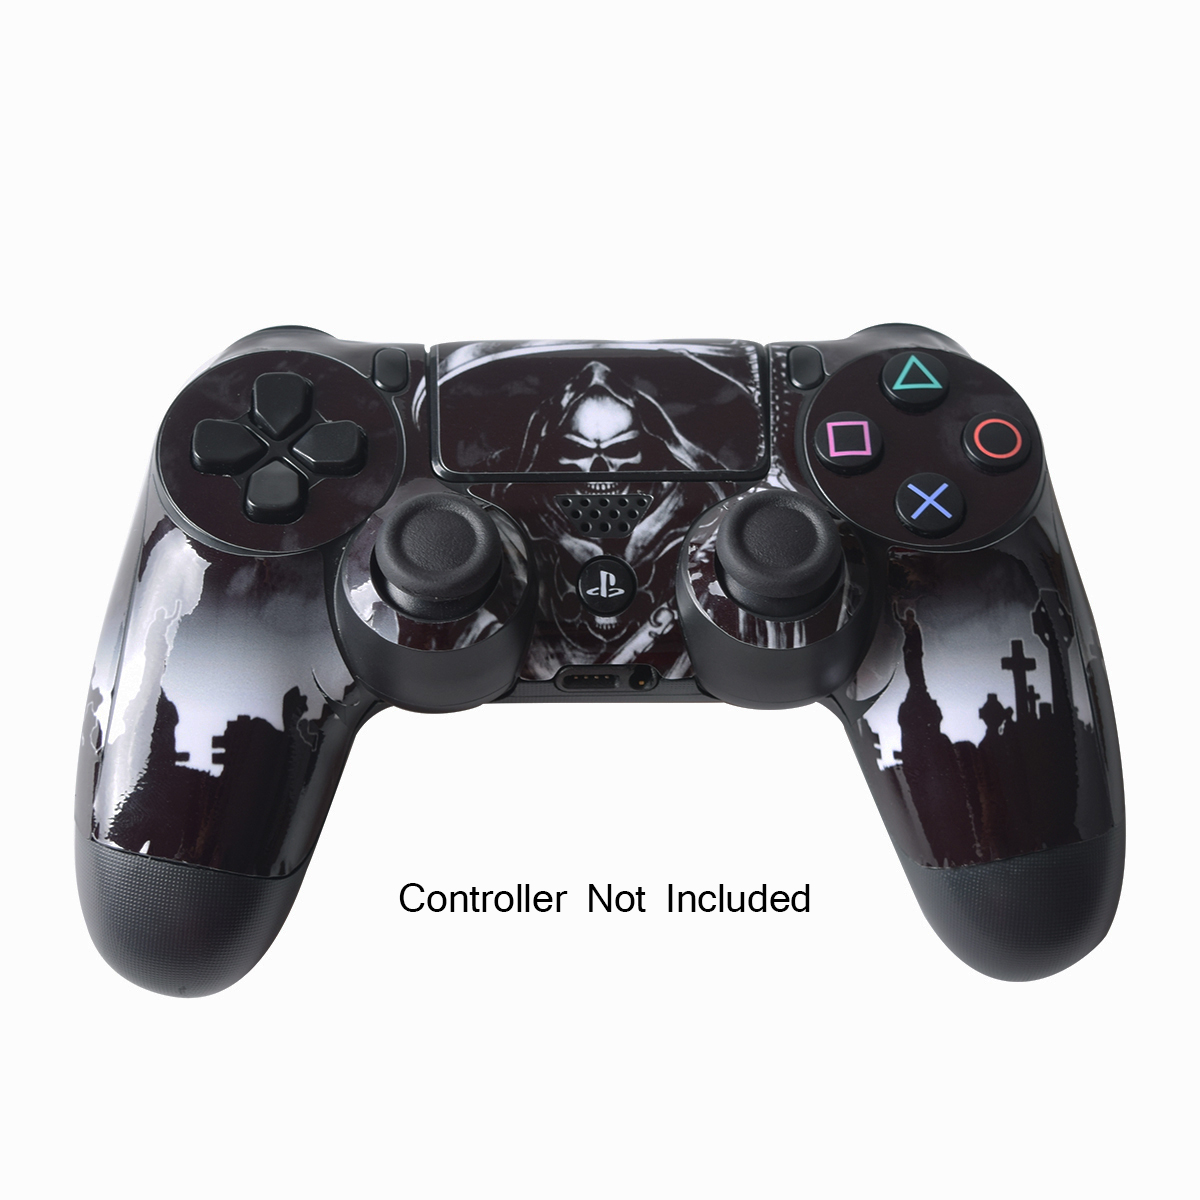 PS4 Controller Skins Stickers PS4 Remote Skin Playstation 4 Dualshock 4 Vinyl Decal Reaper Black - image 2 of 4